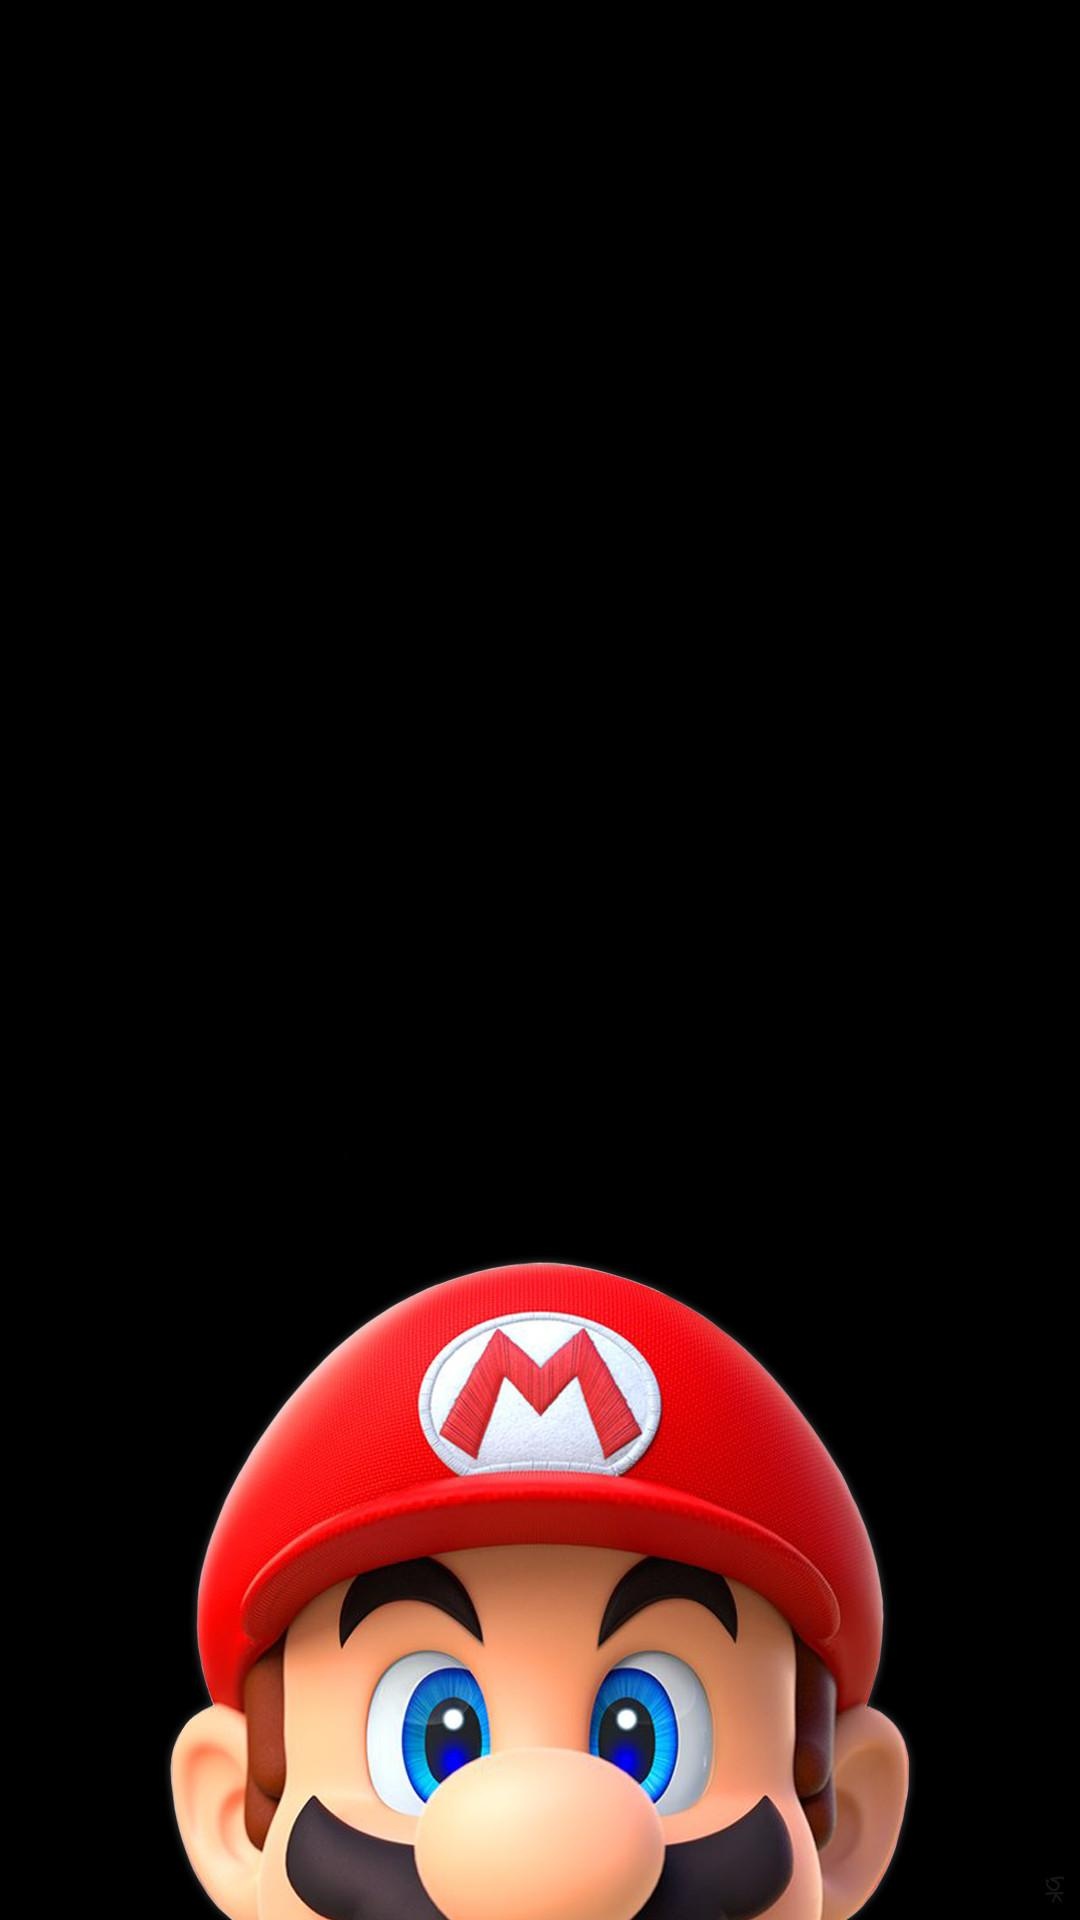 Mario iPhone wallpapers, Gaming backgrounds, Mario Bros. art, Mobile customization, 1080x1920 Full HD Phone